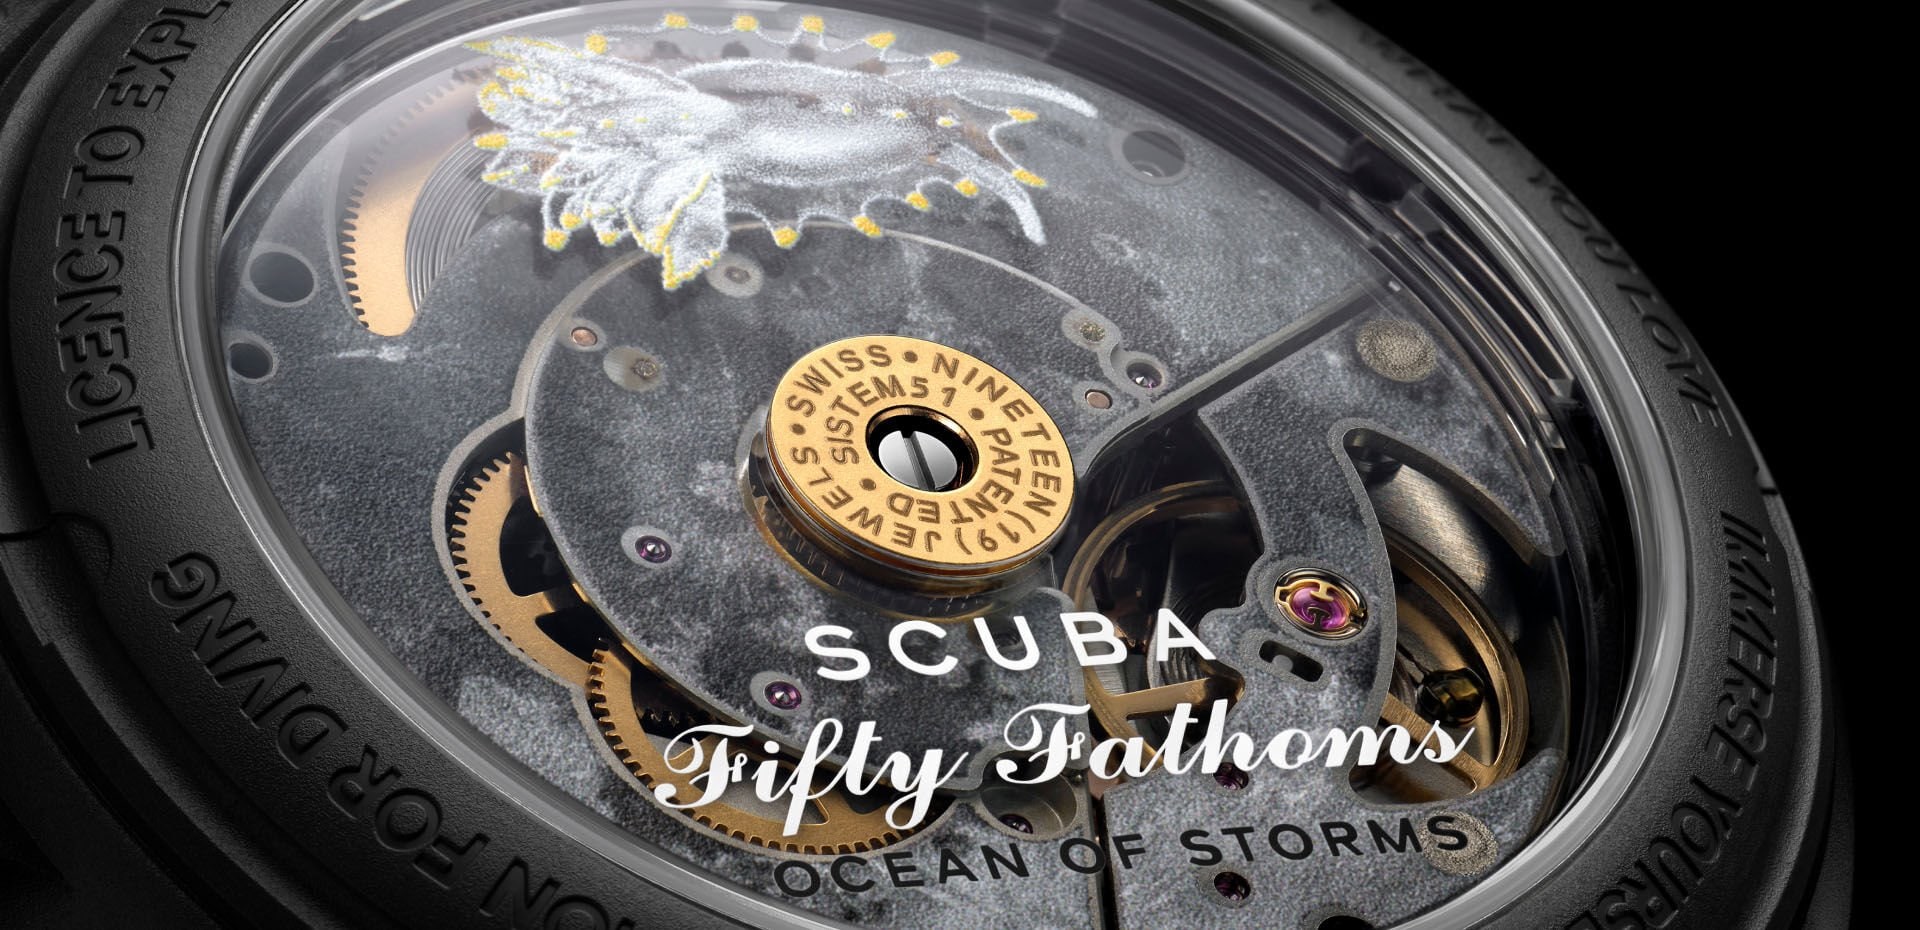 OCEAN OF STORMS - Bioceramic Scuba Fifty Fathoms Collection